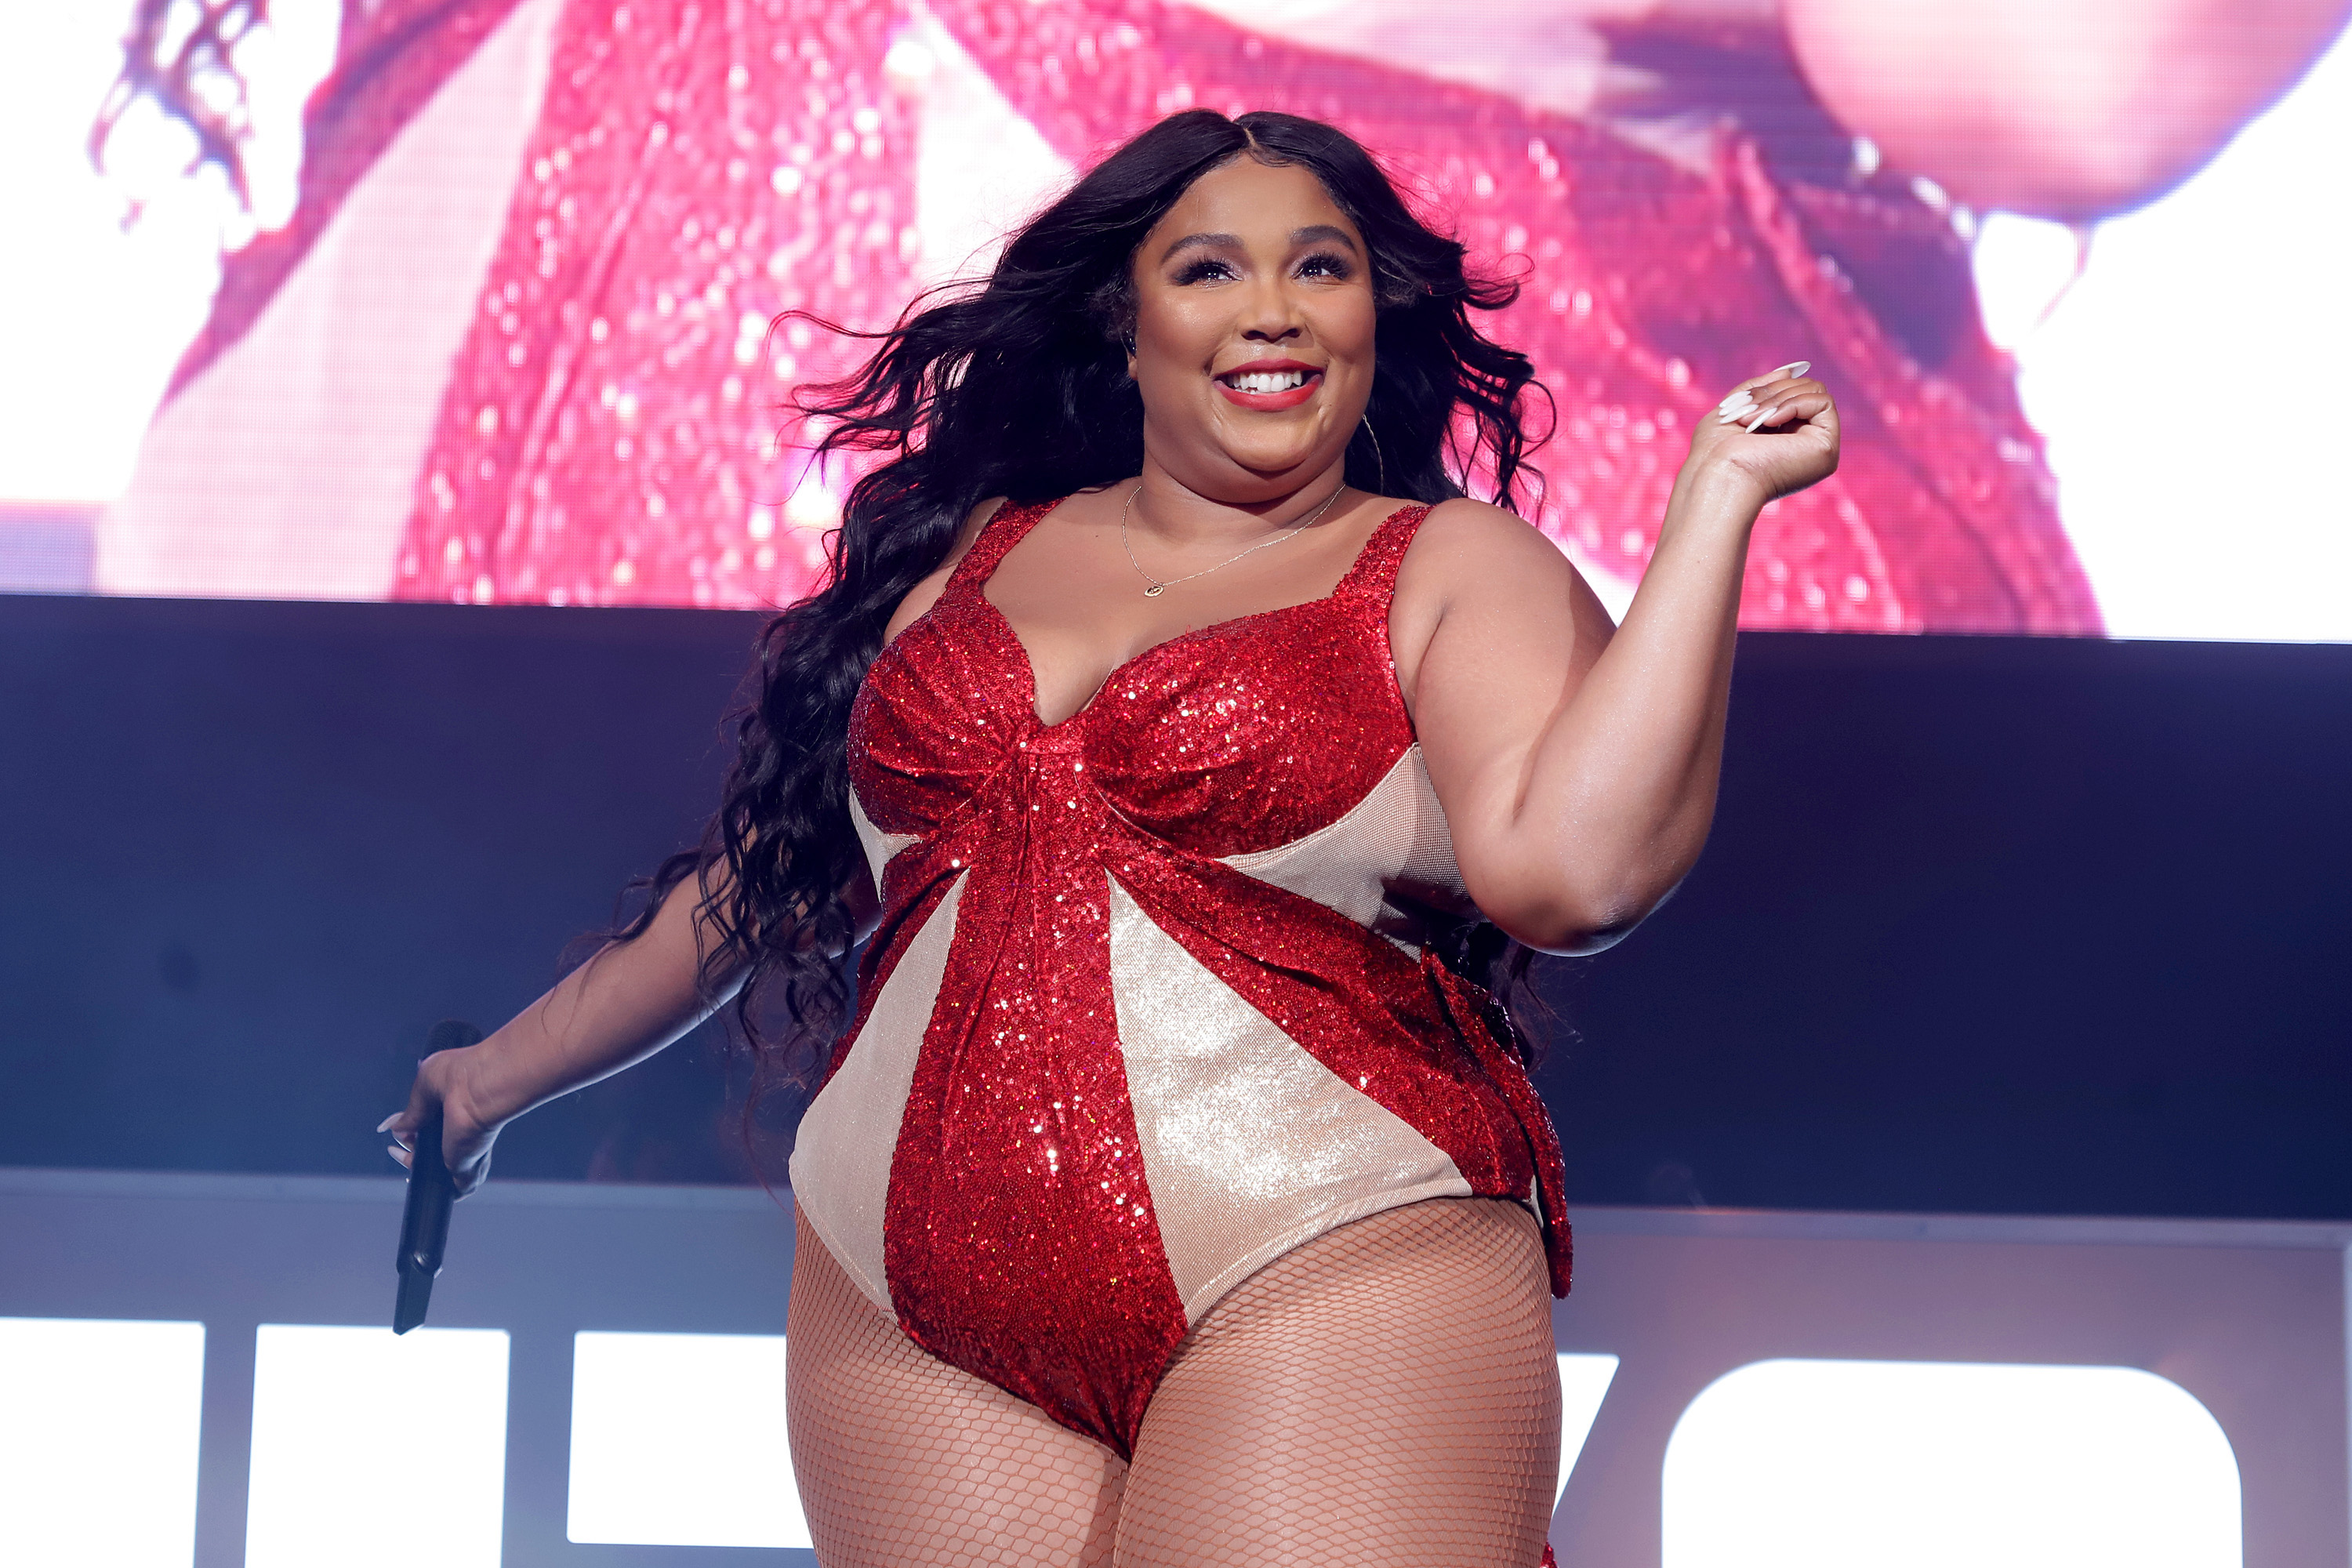 Lizzo performs onstage during 93.3 FLZ's Jingle Ball 2019 Presented by Capital One